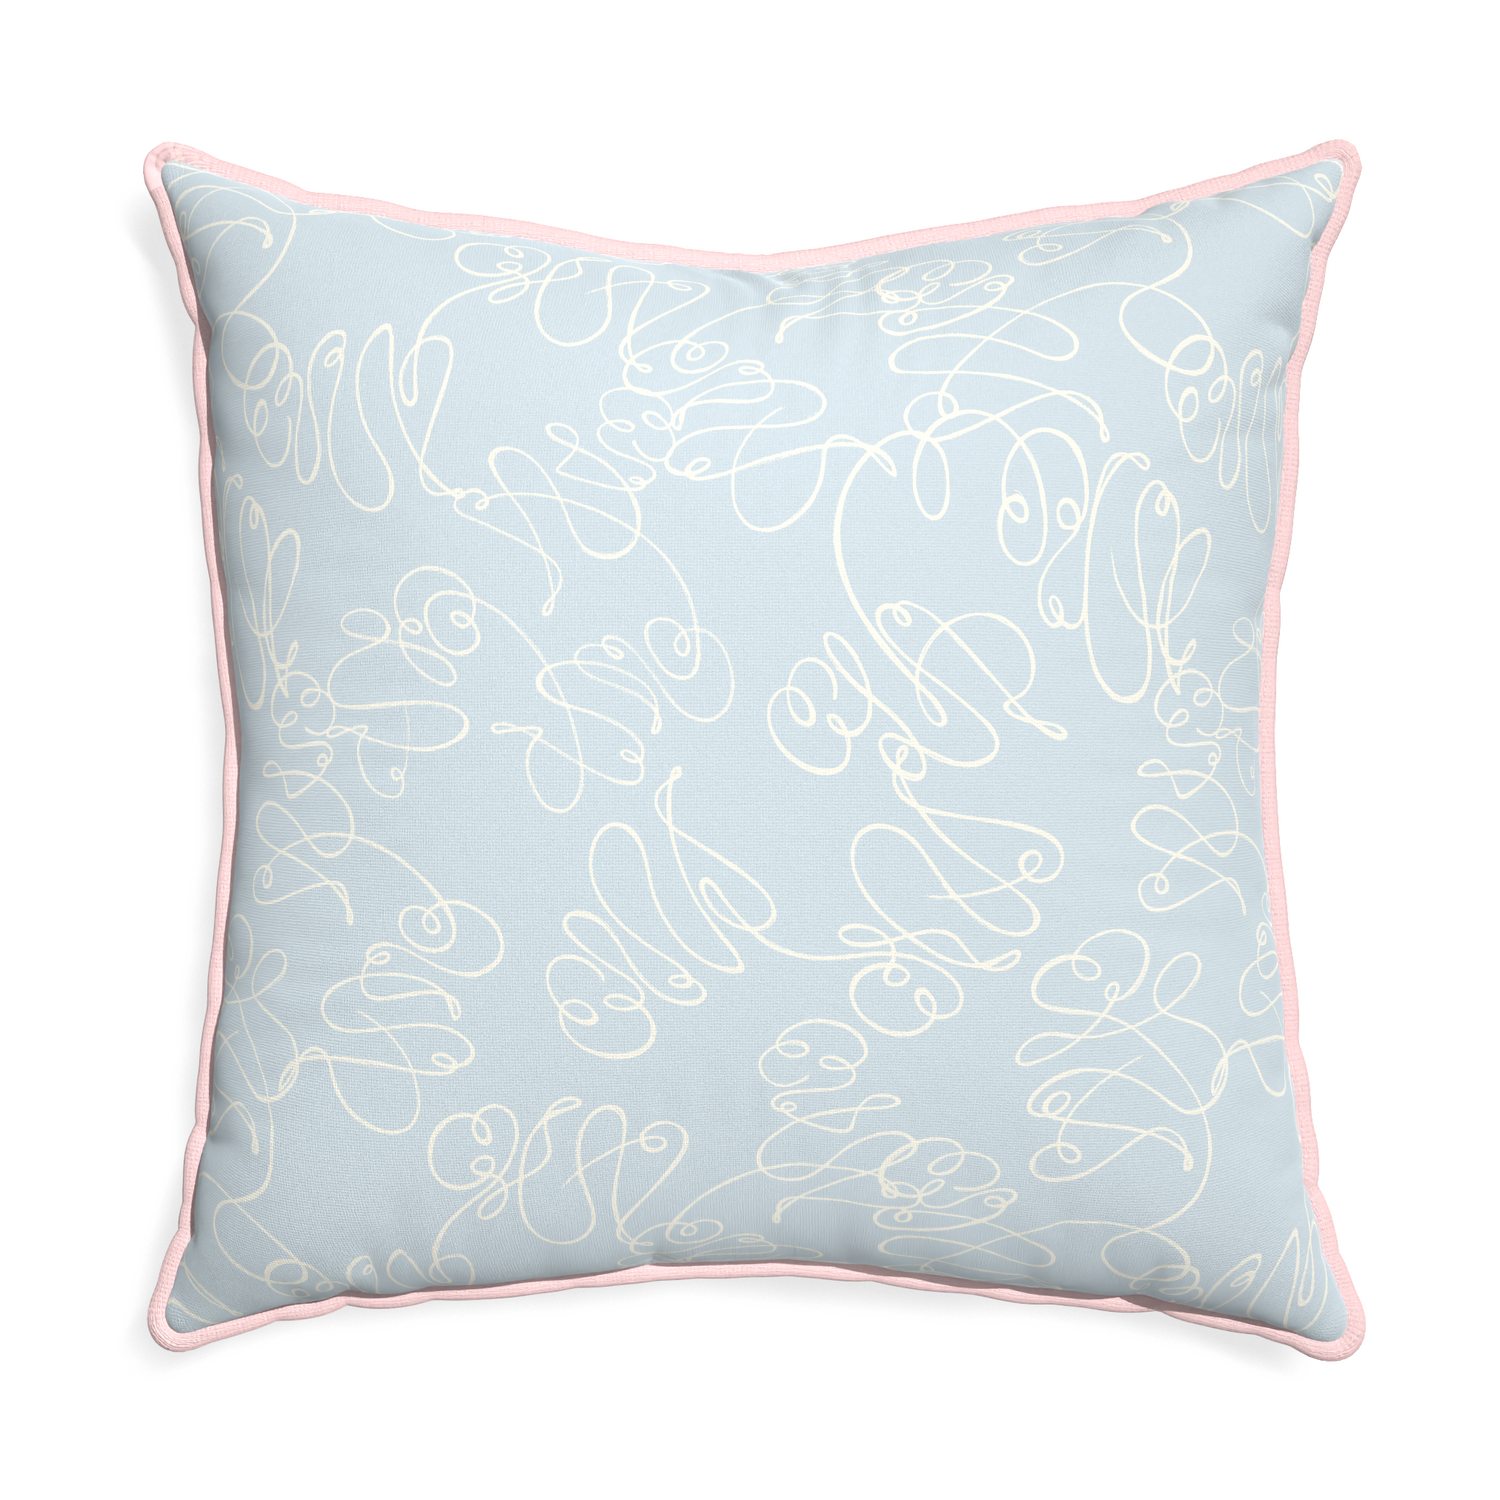 Euro-sham mirabella custom powder blue abstractpillow with petal piping on white background